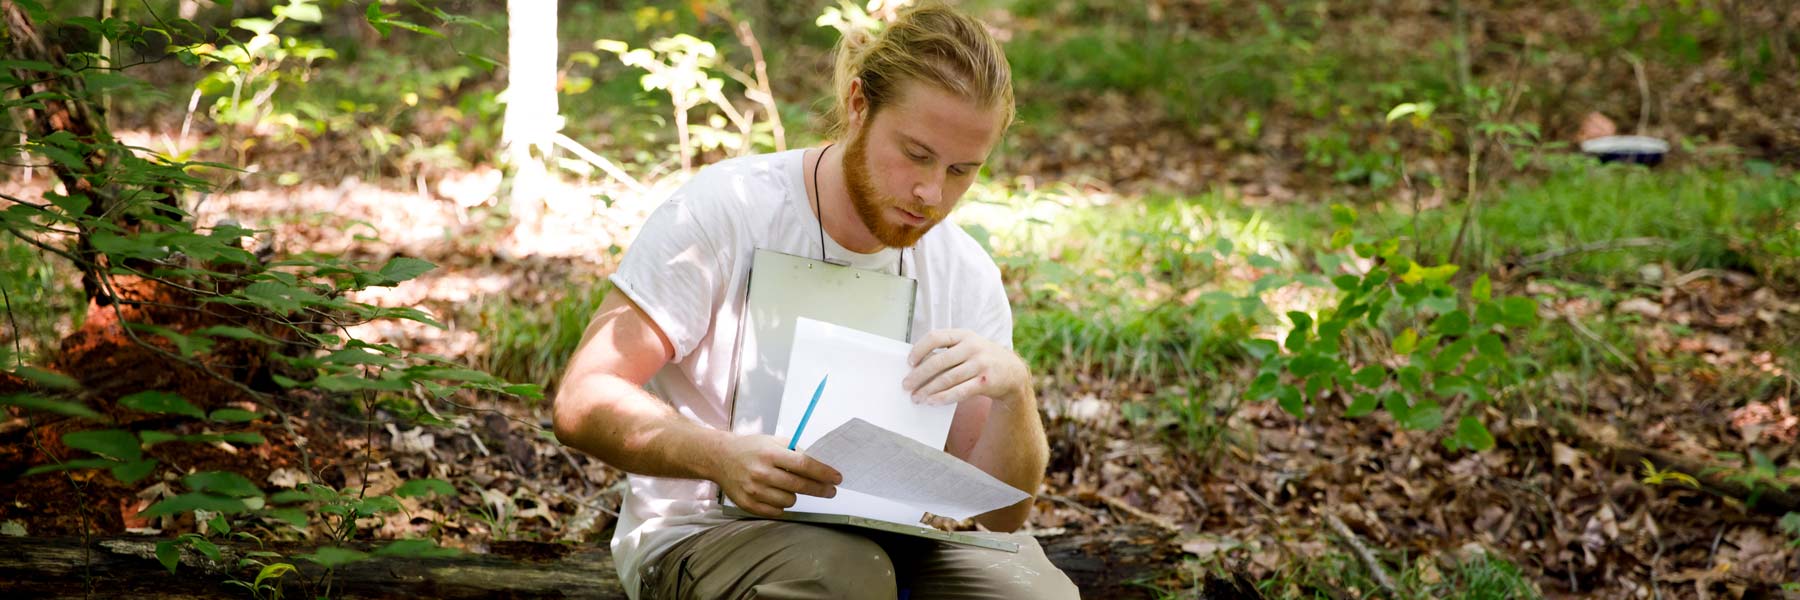 A young man wearing work clothes conducts field research in a forest. 